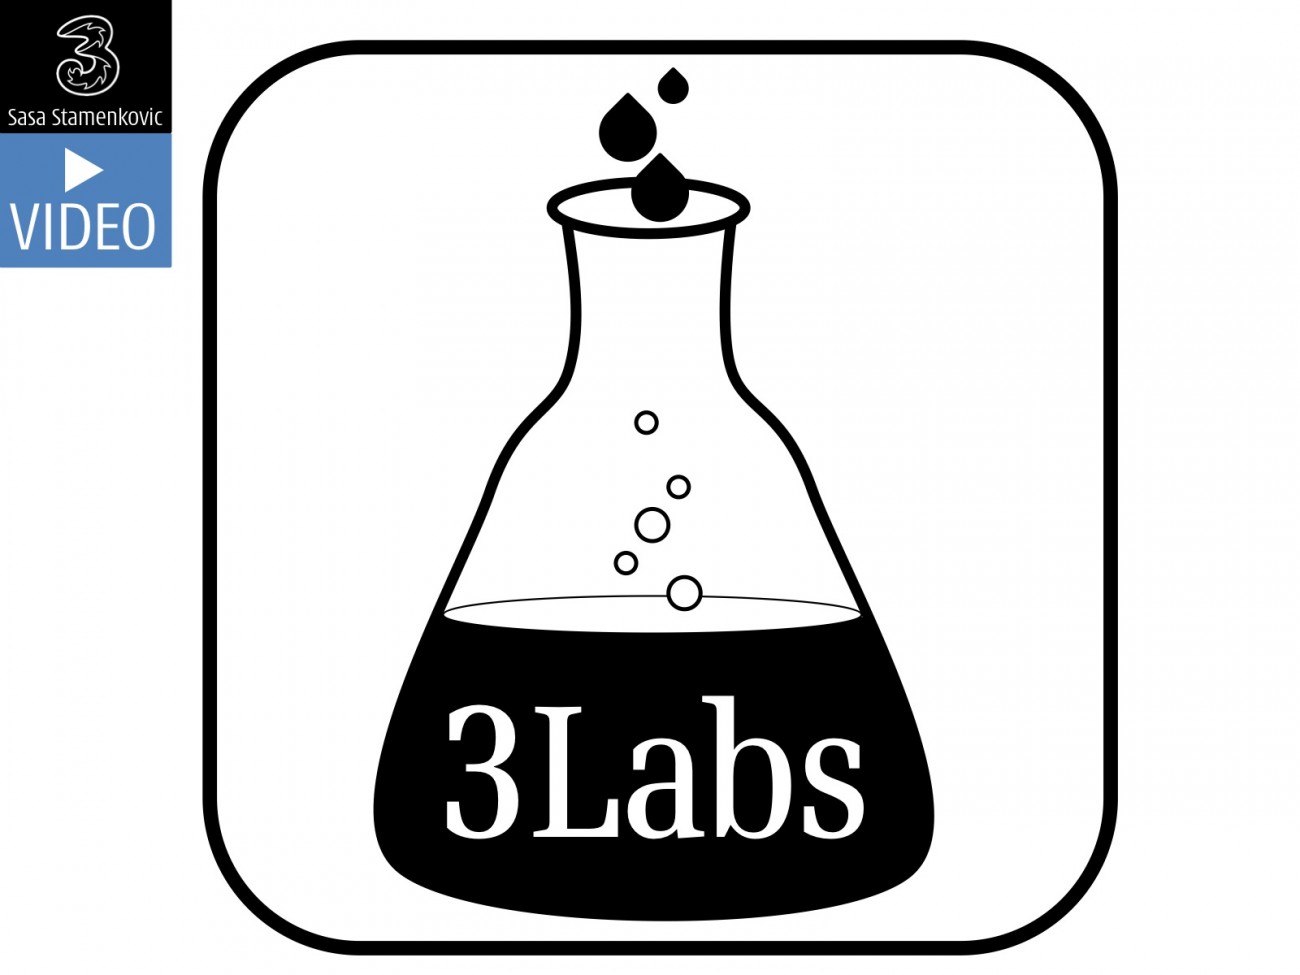 3LABS VIDEO